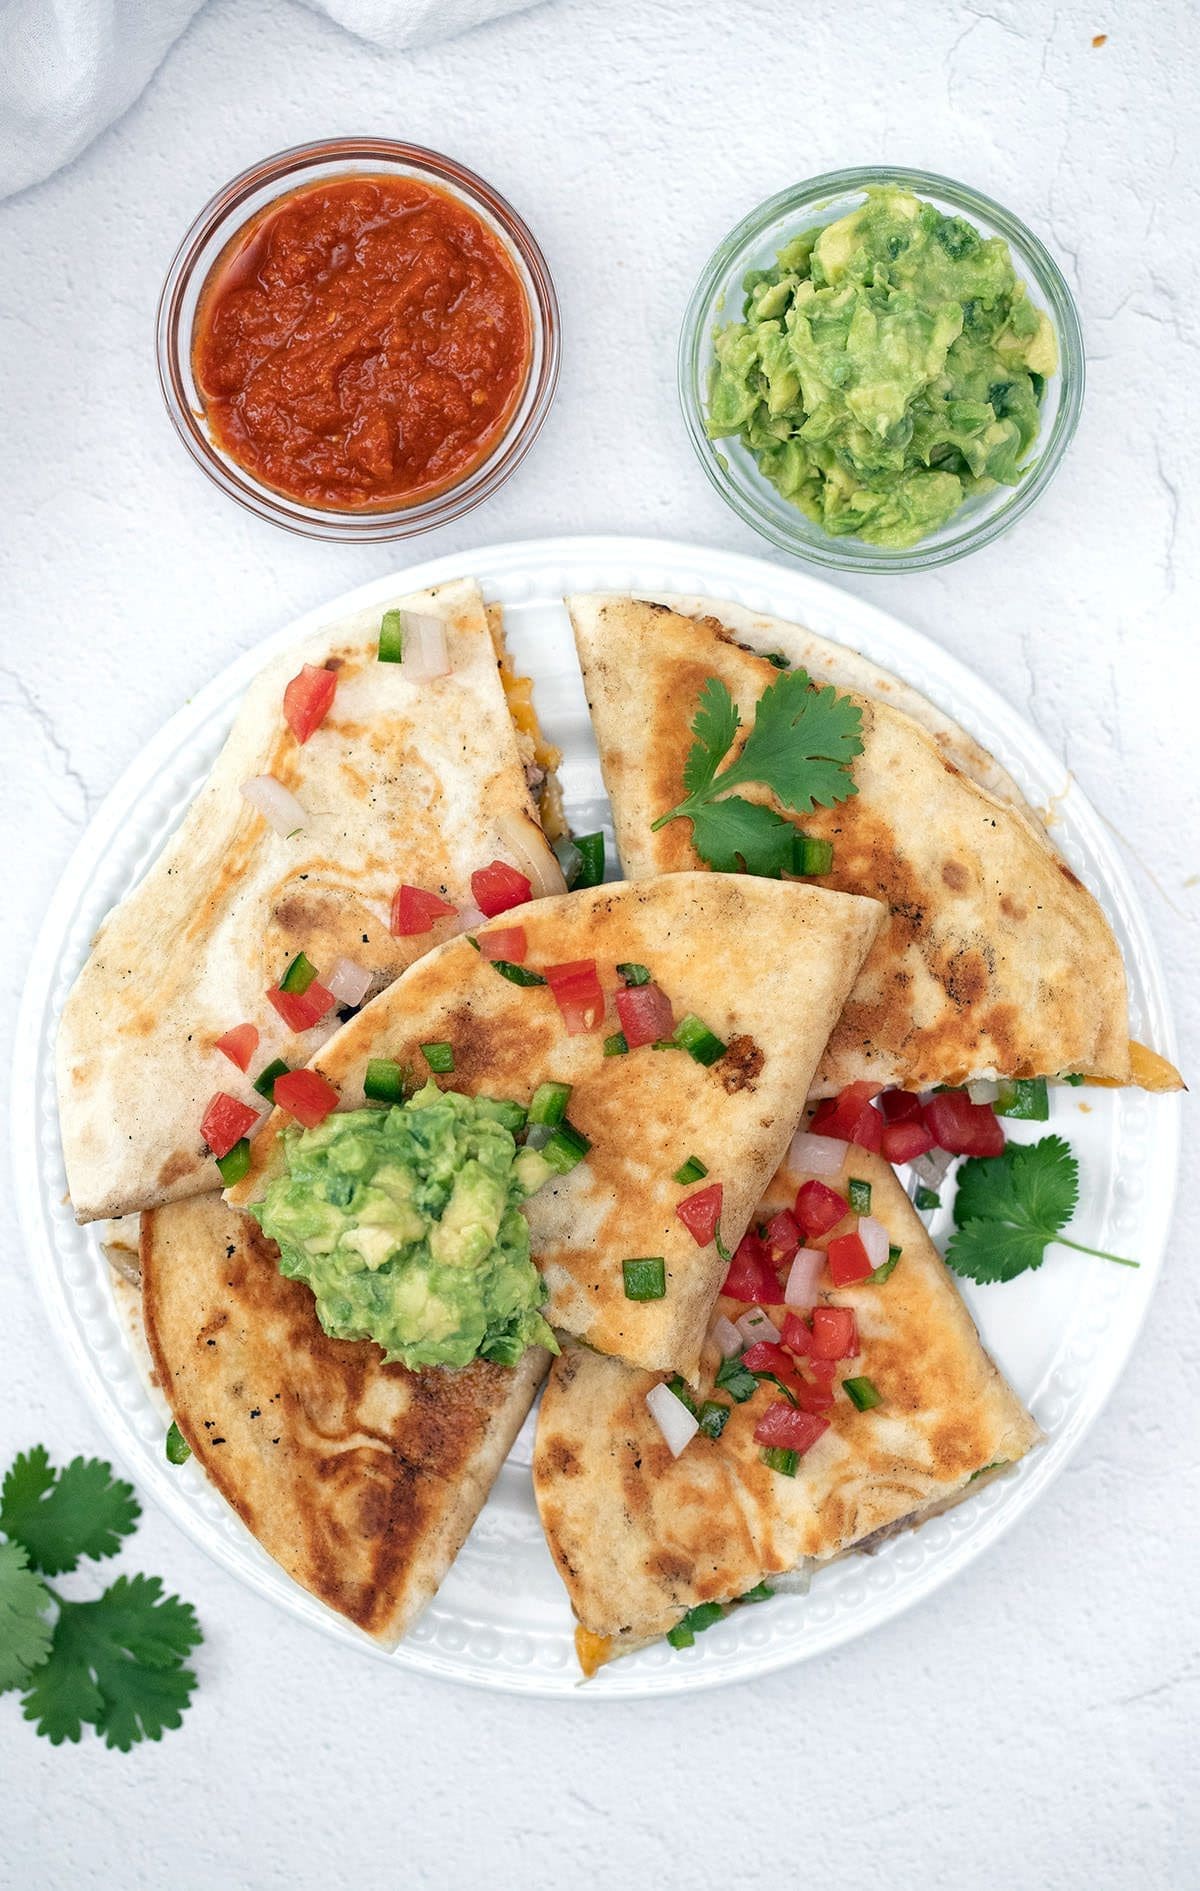 Quesadilla with steak on a white plate with salsa and quacamole.